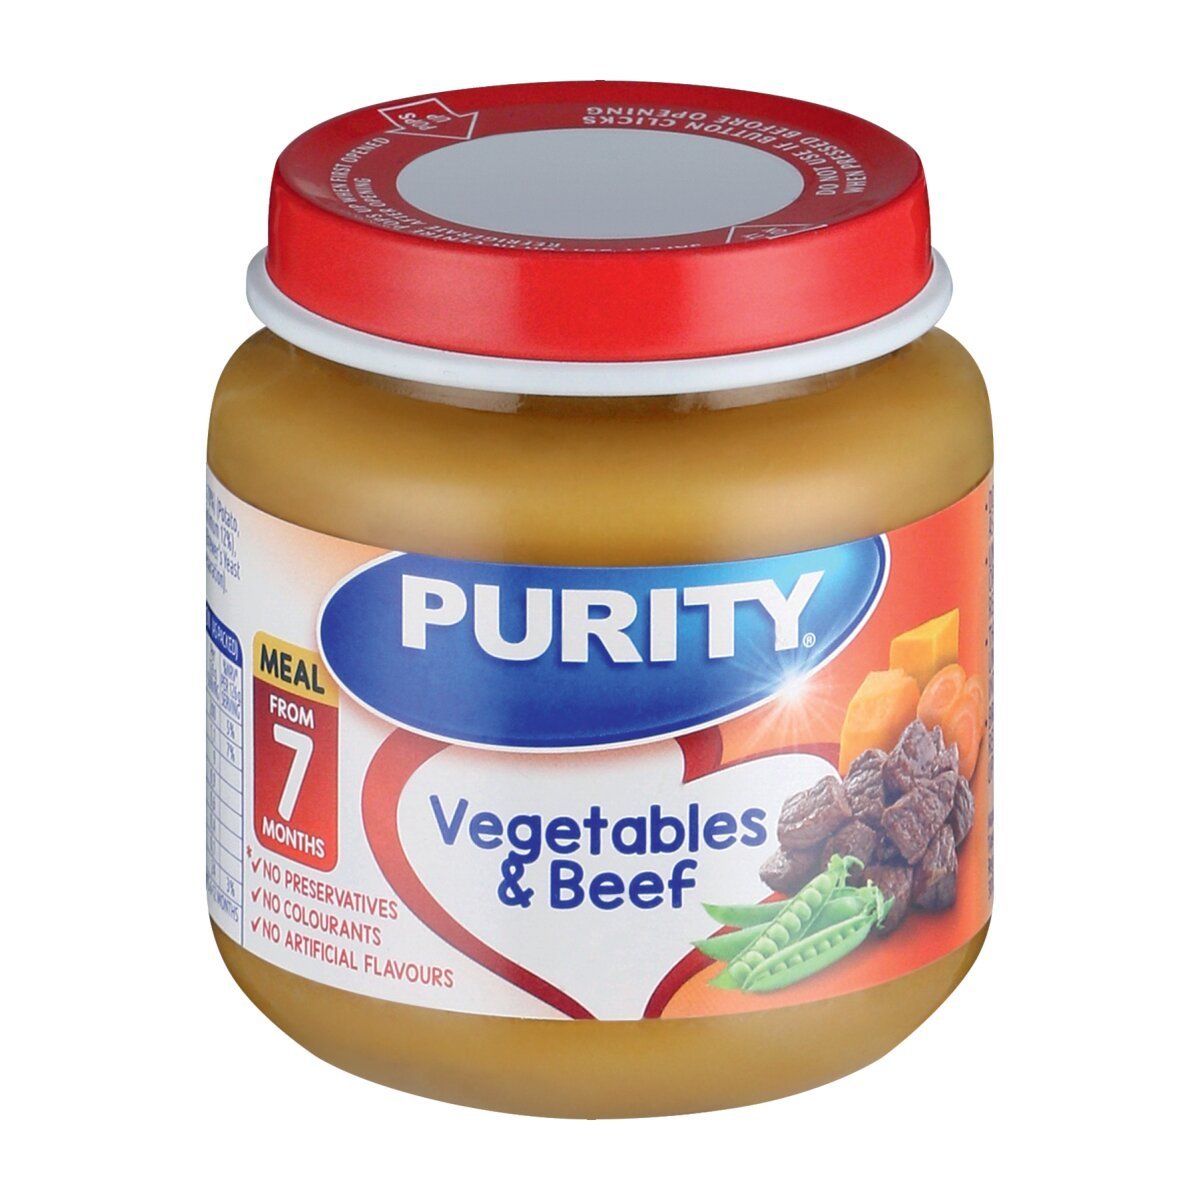 Purity 7 Months Vegetables &amp;amp; Beef 125Ml - 2021